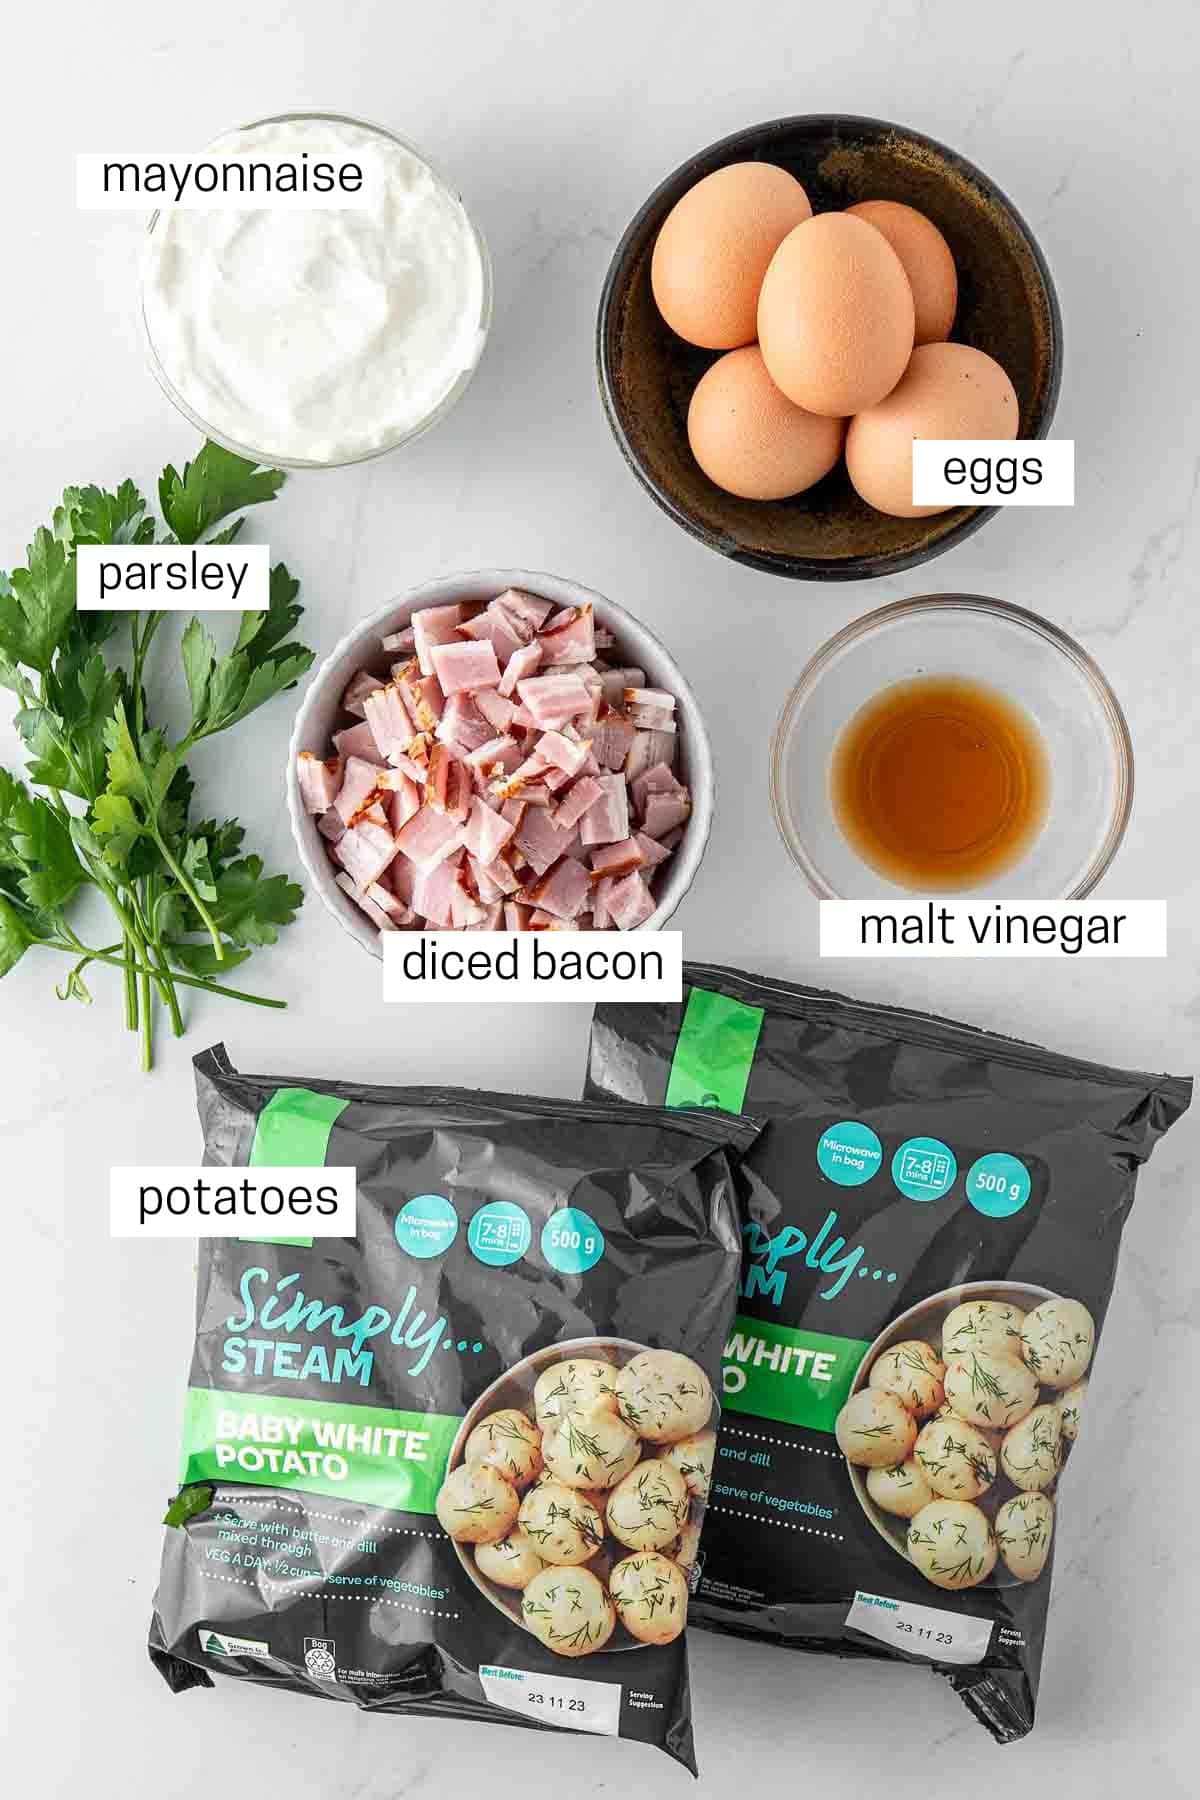 All ingredients needed for dairy free potato salad laid out in bowls.